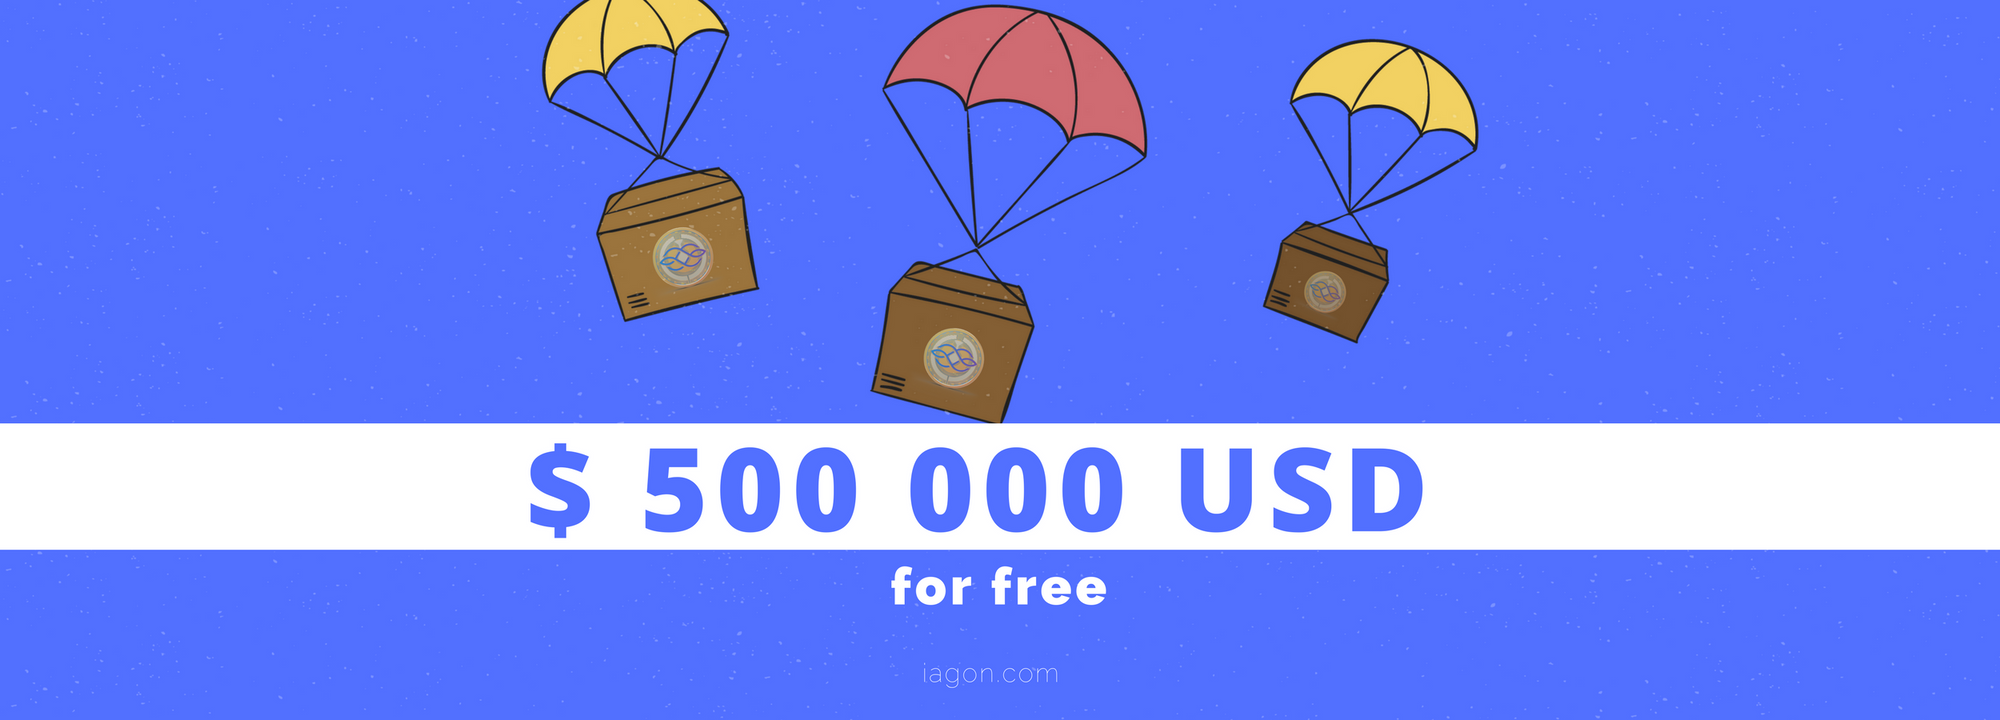 Amazing $500 000 USD Airdrop for Everyone